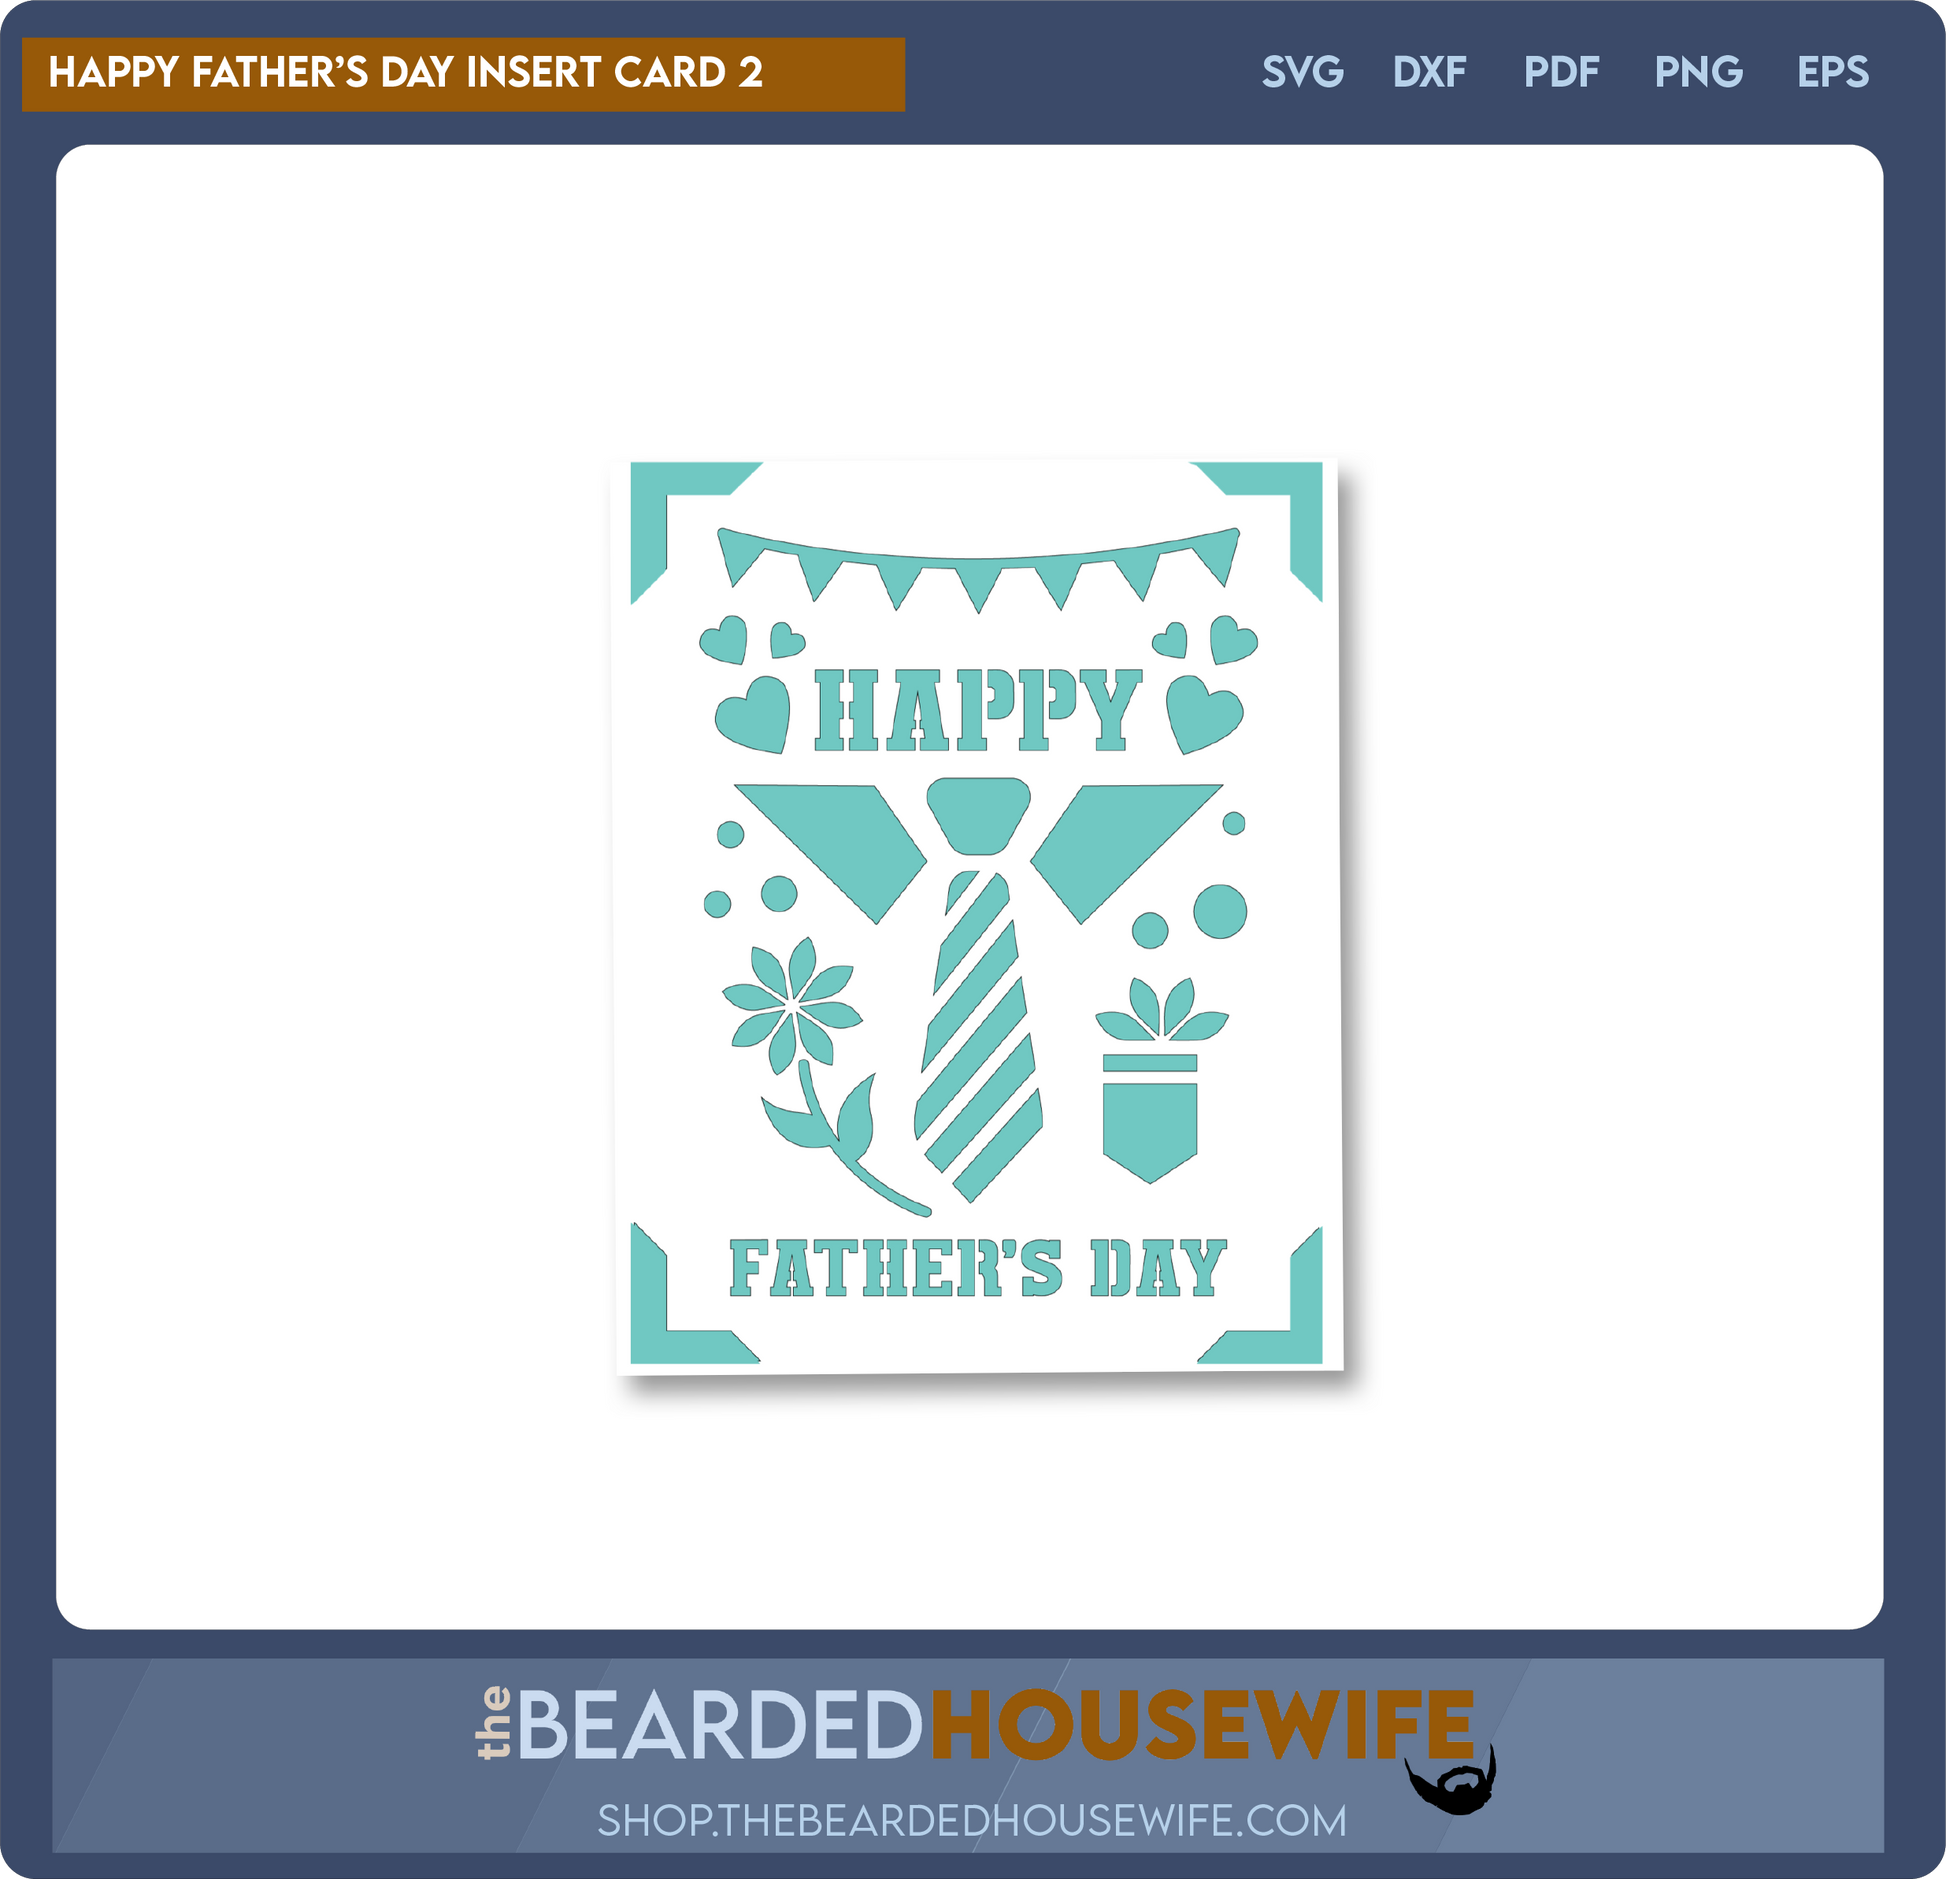 happy fathers day insert card 2